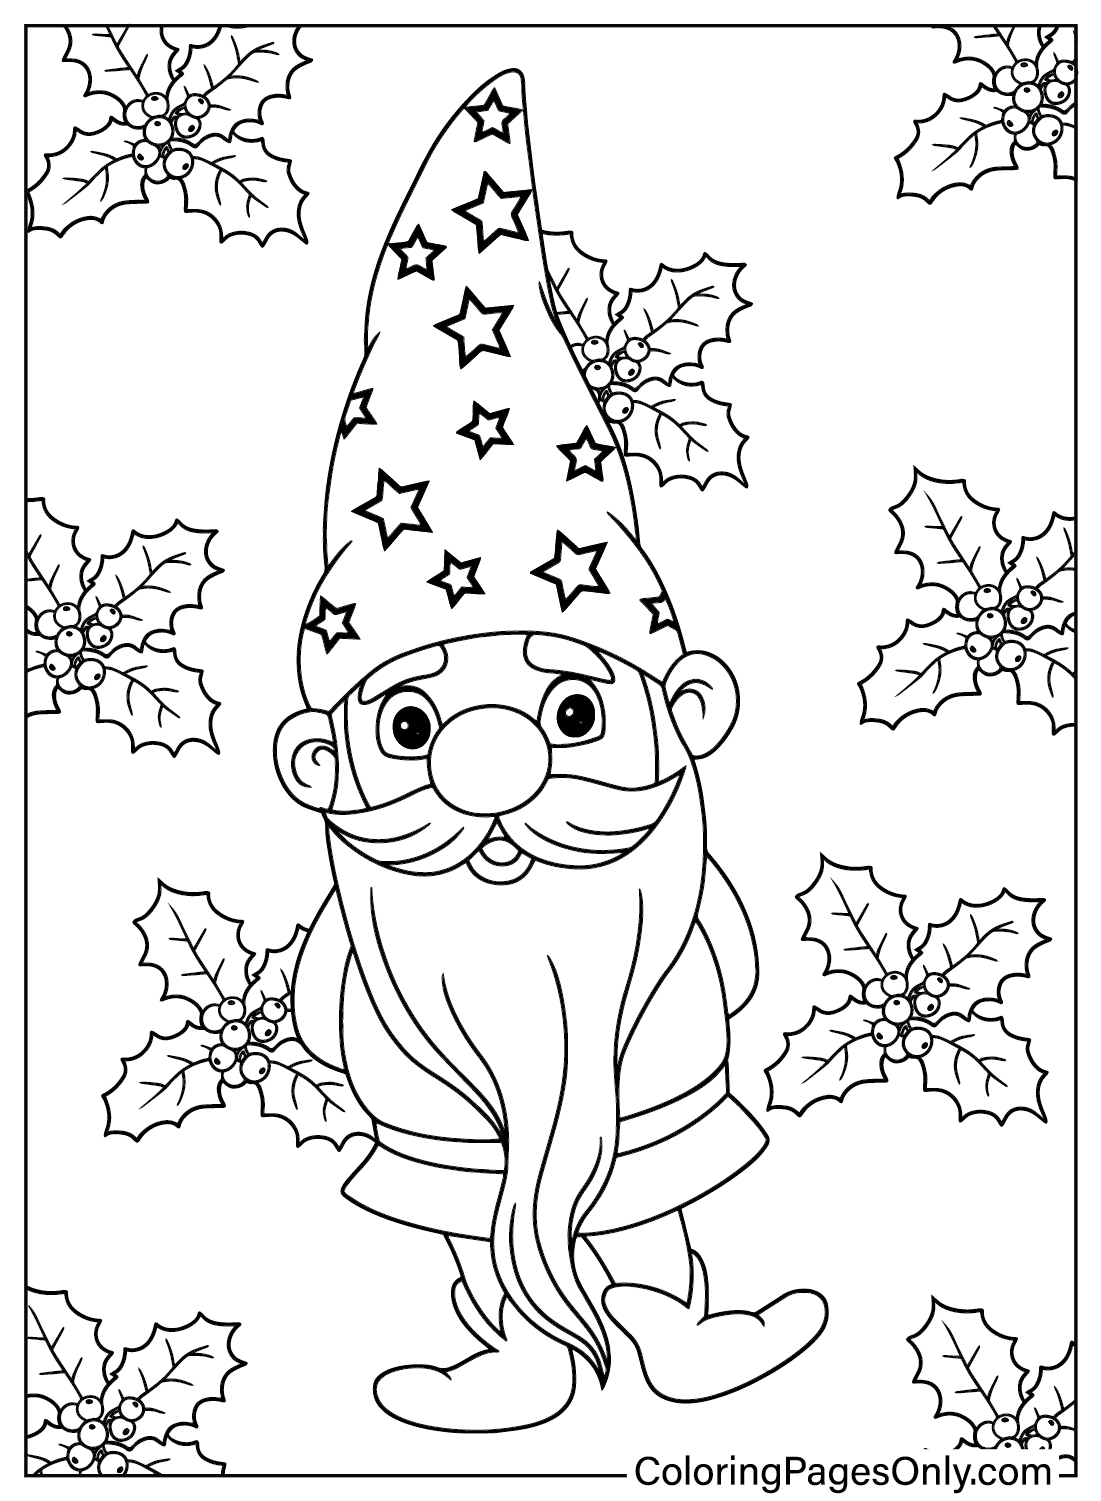 Gnome Coloring Pages - Free Printable Coloring Pages